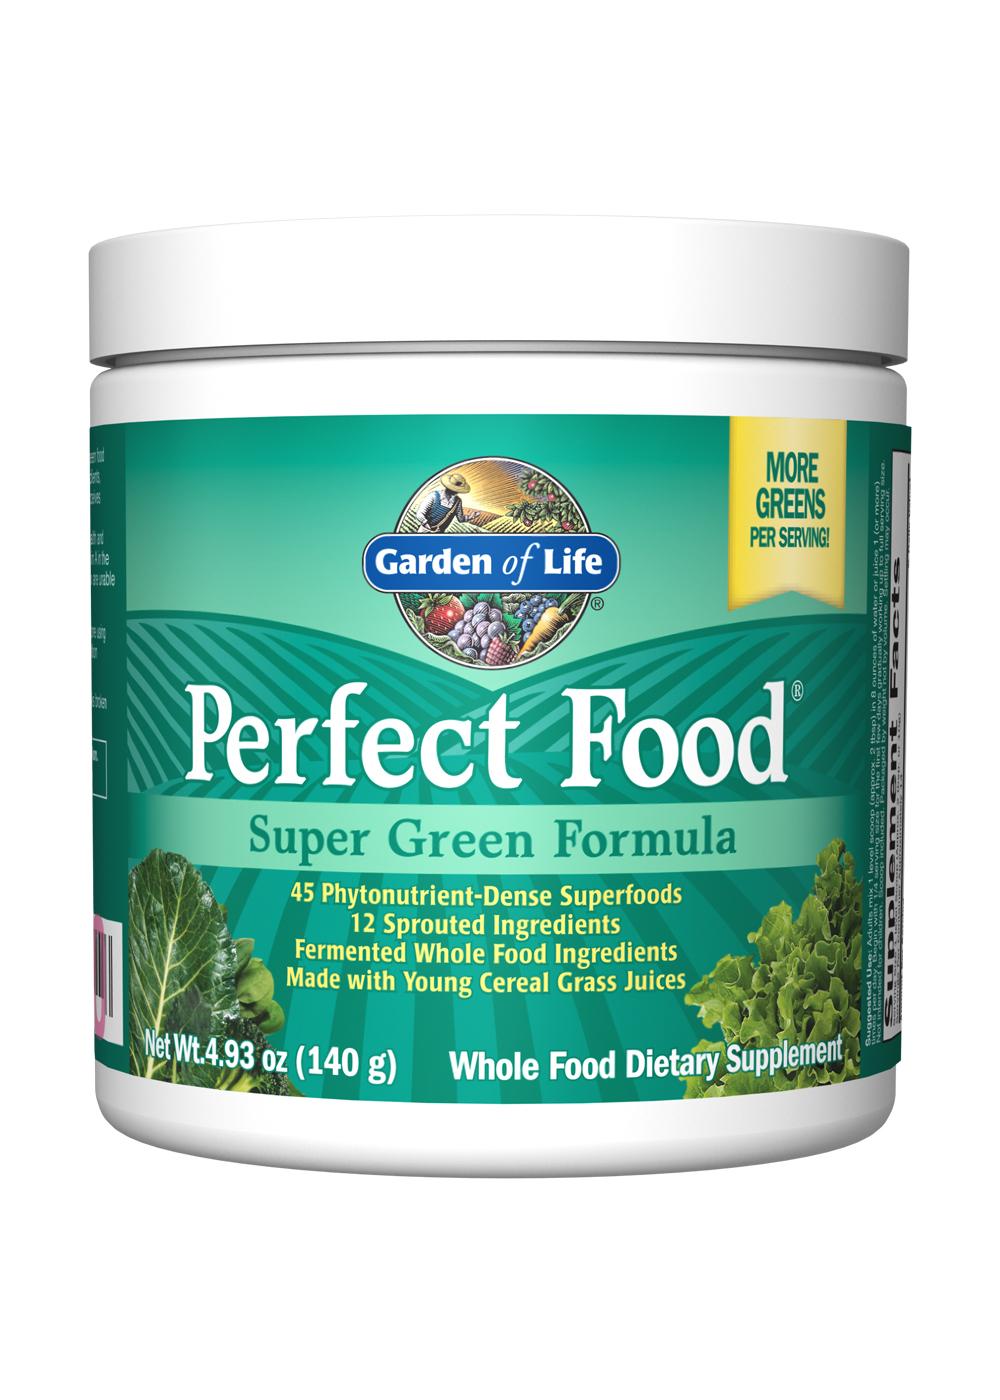 Garden of Life Perfect Food Super Green Formula; image 1 of 2